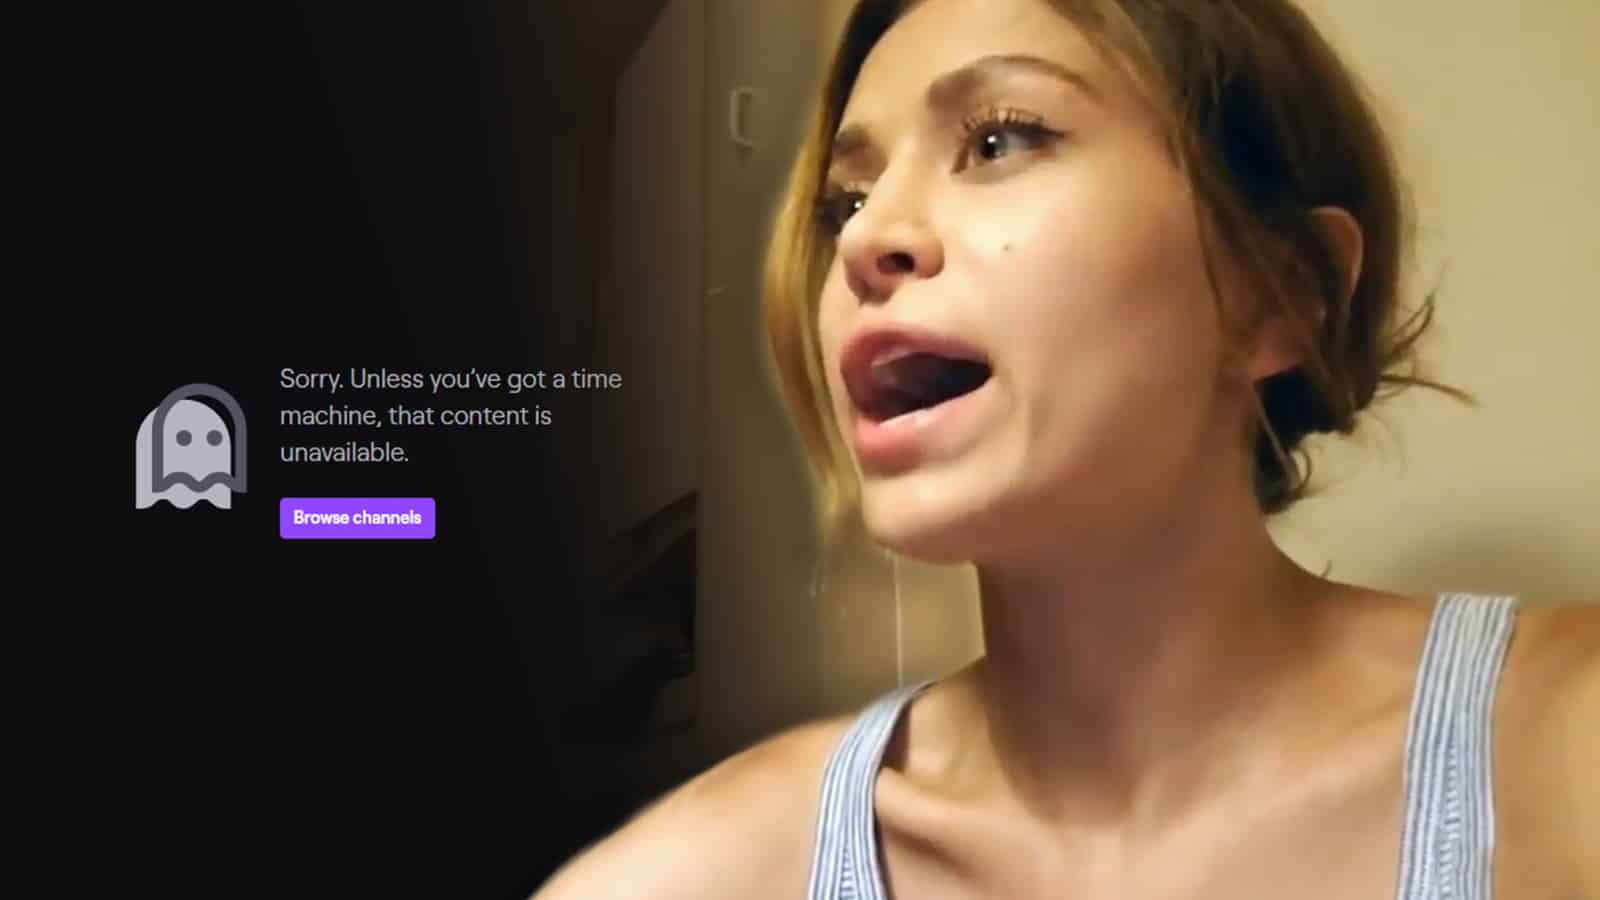 Mira slams Twitch over double standards after ban for showing nudity.